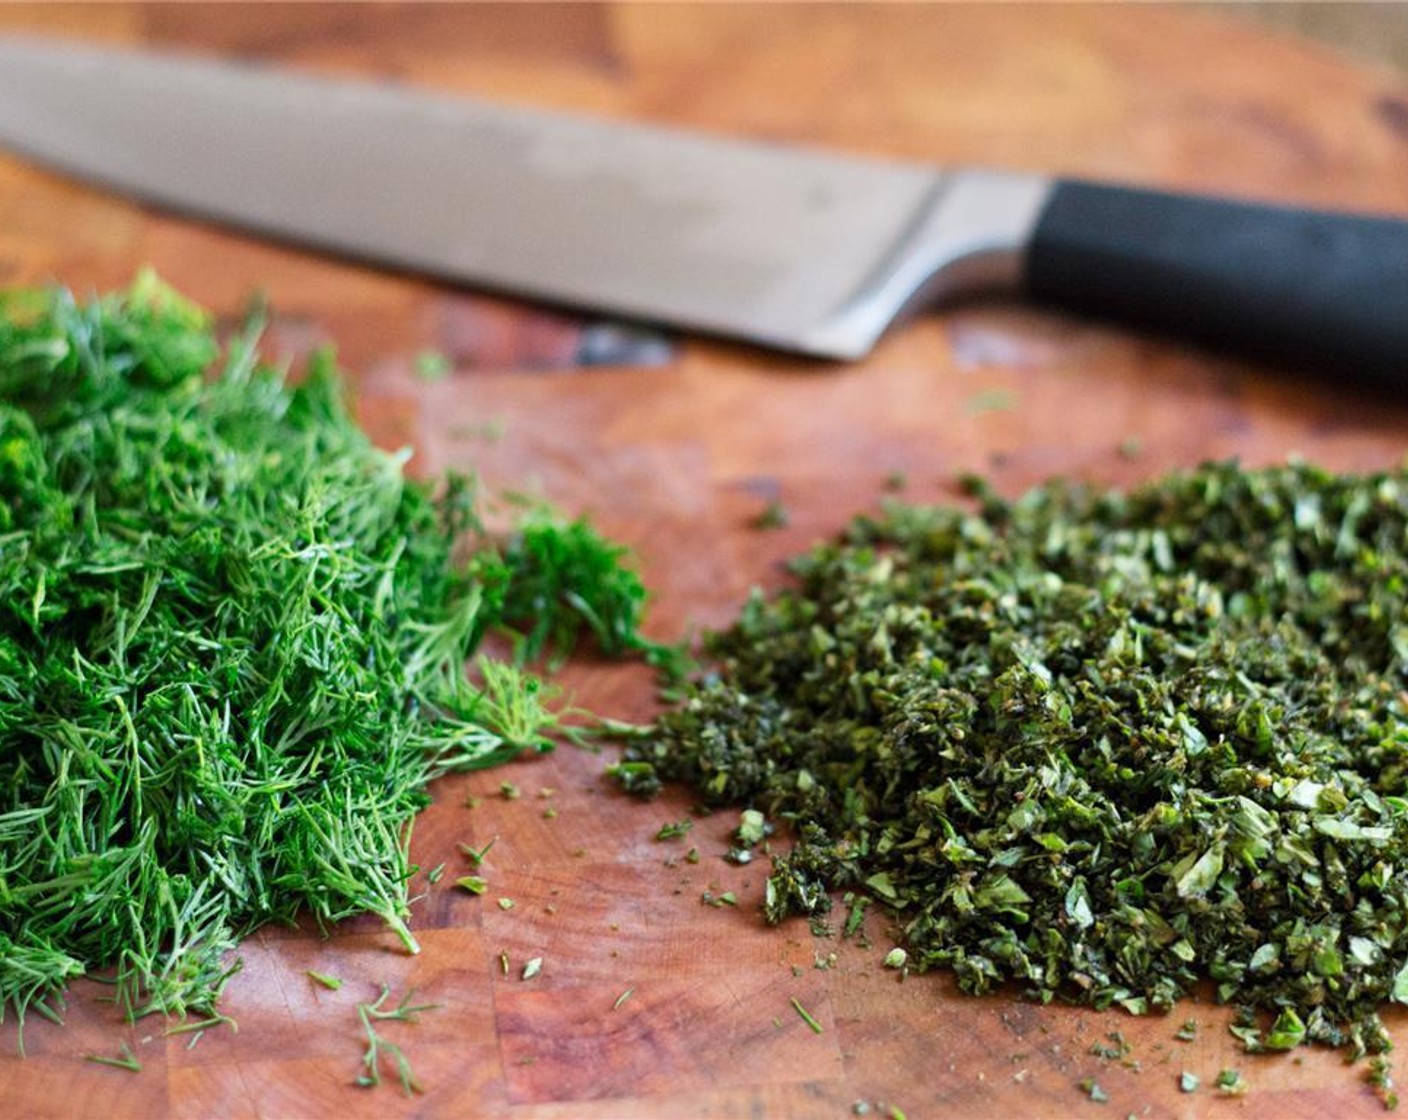 step 1 Gently pull off the leaves from the stems for the oregano and dill. Mince the Fresh Oregano (1/2 cup) and chop the Fresh Dill (1 cup).